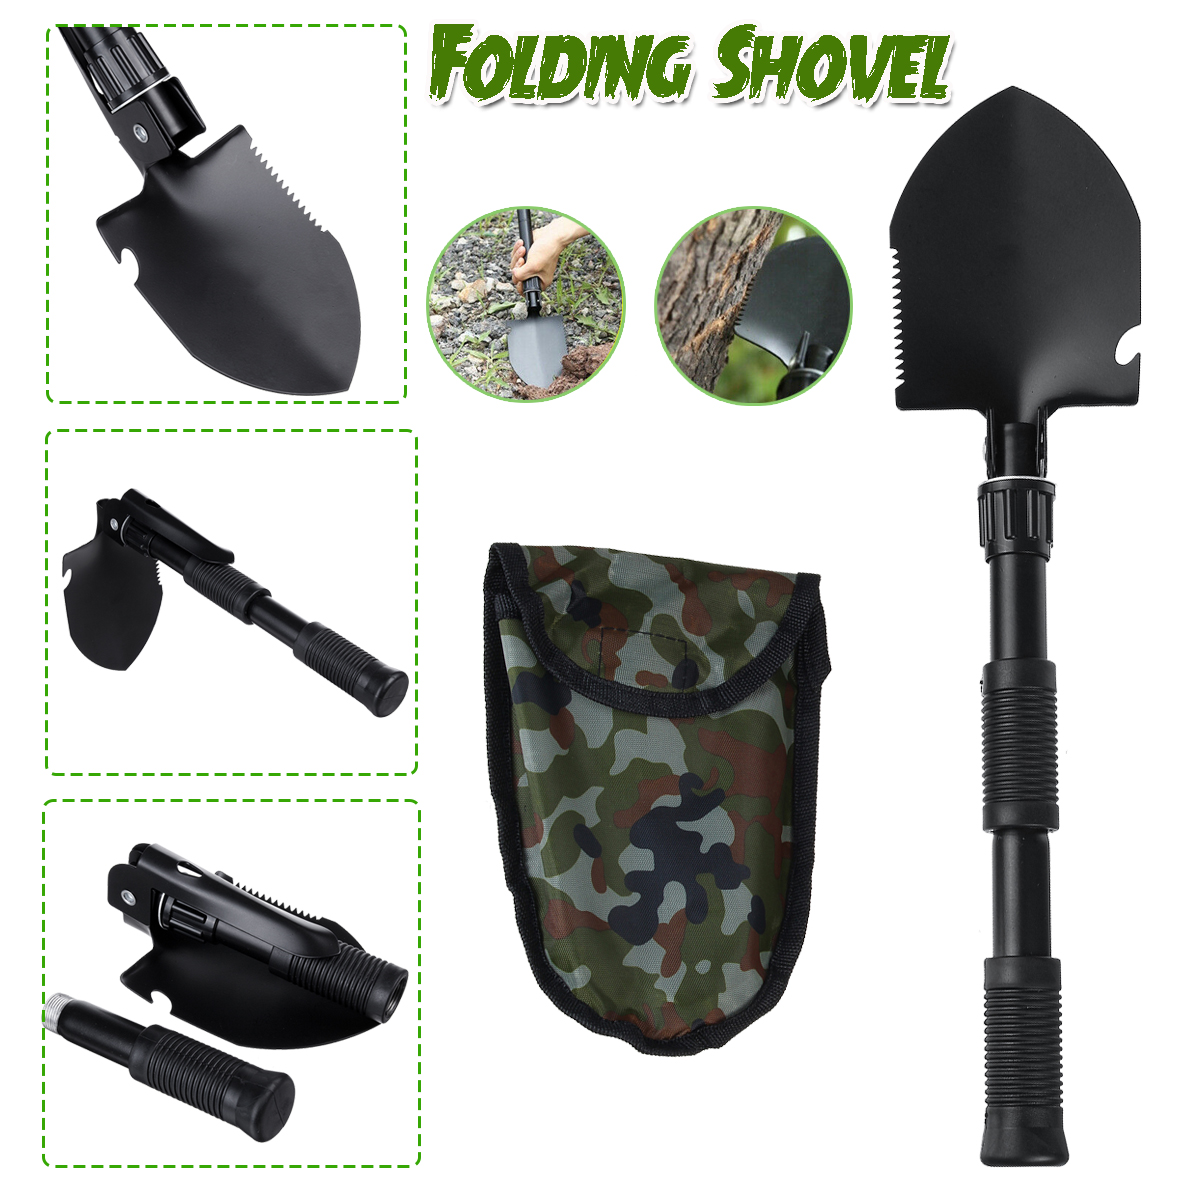 4-in-1-Multifunctional-Camping-Folding-Shovel-Carbon-Steel-Garden-Hiking-Outdoor-Activity-Tool-1810044-2